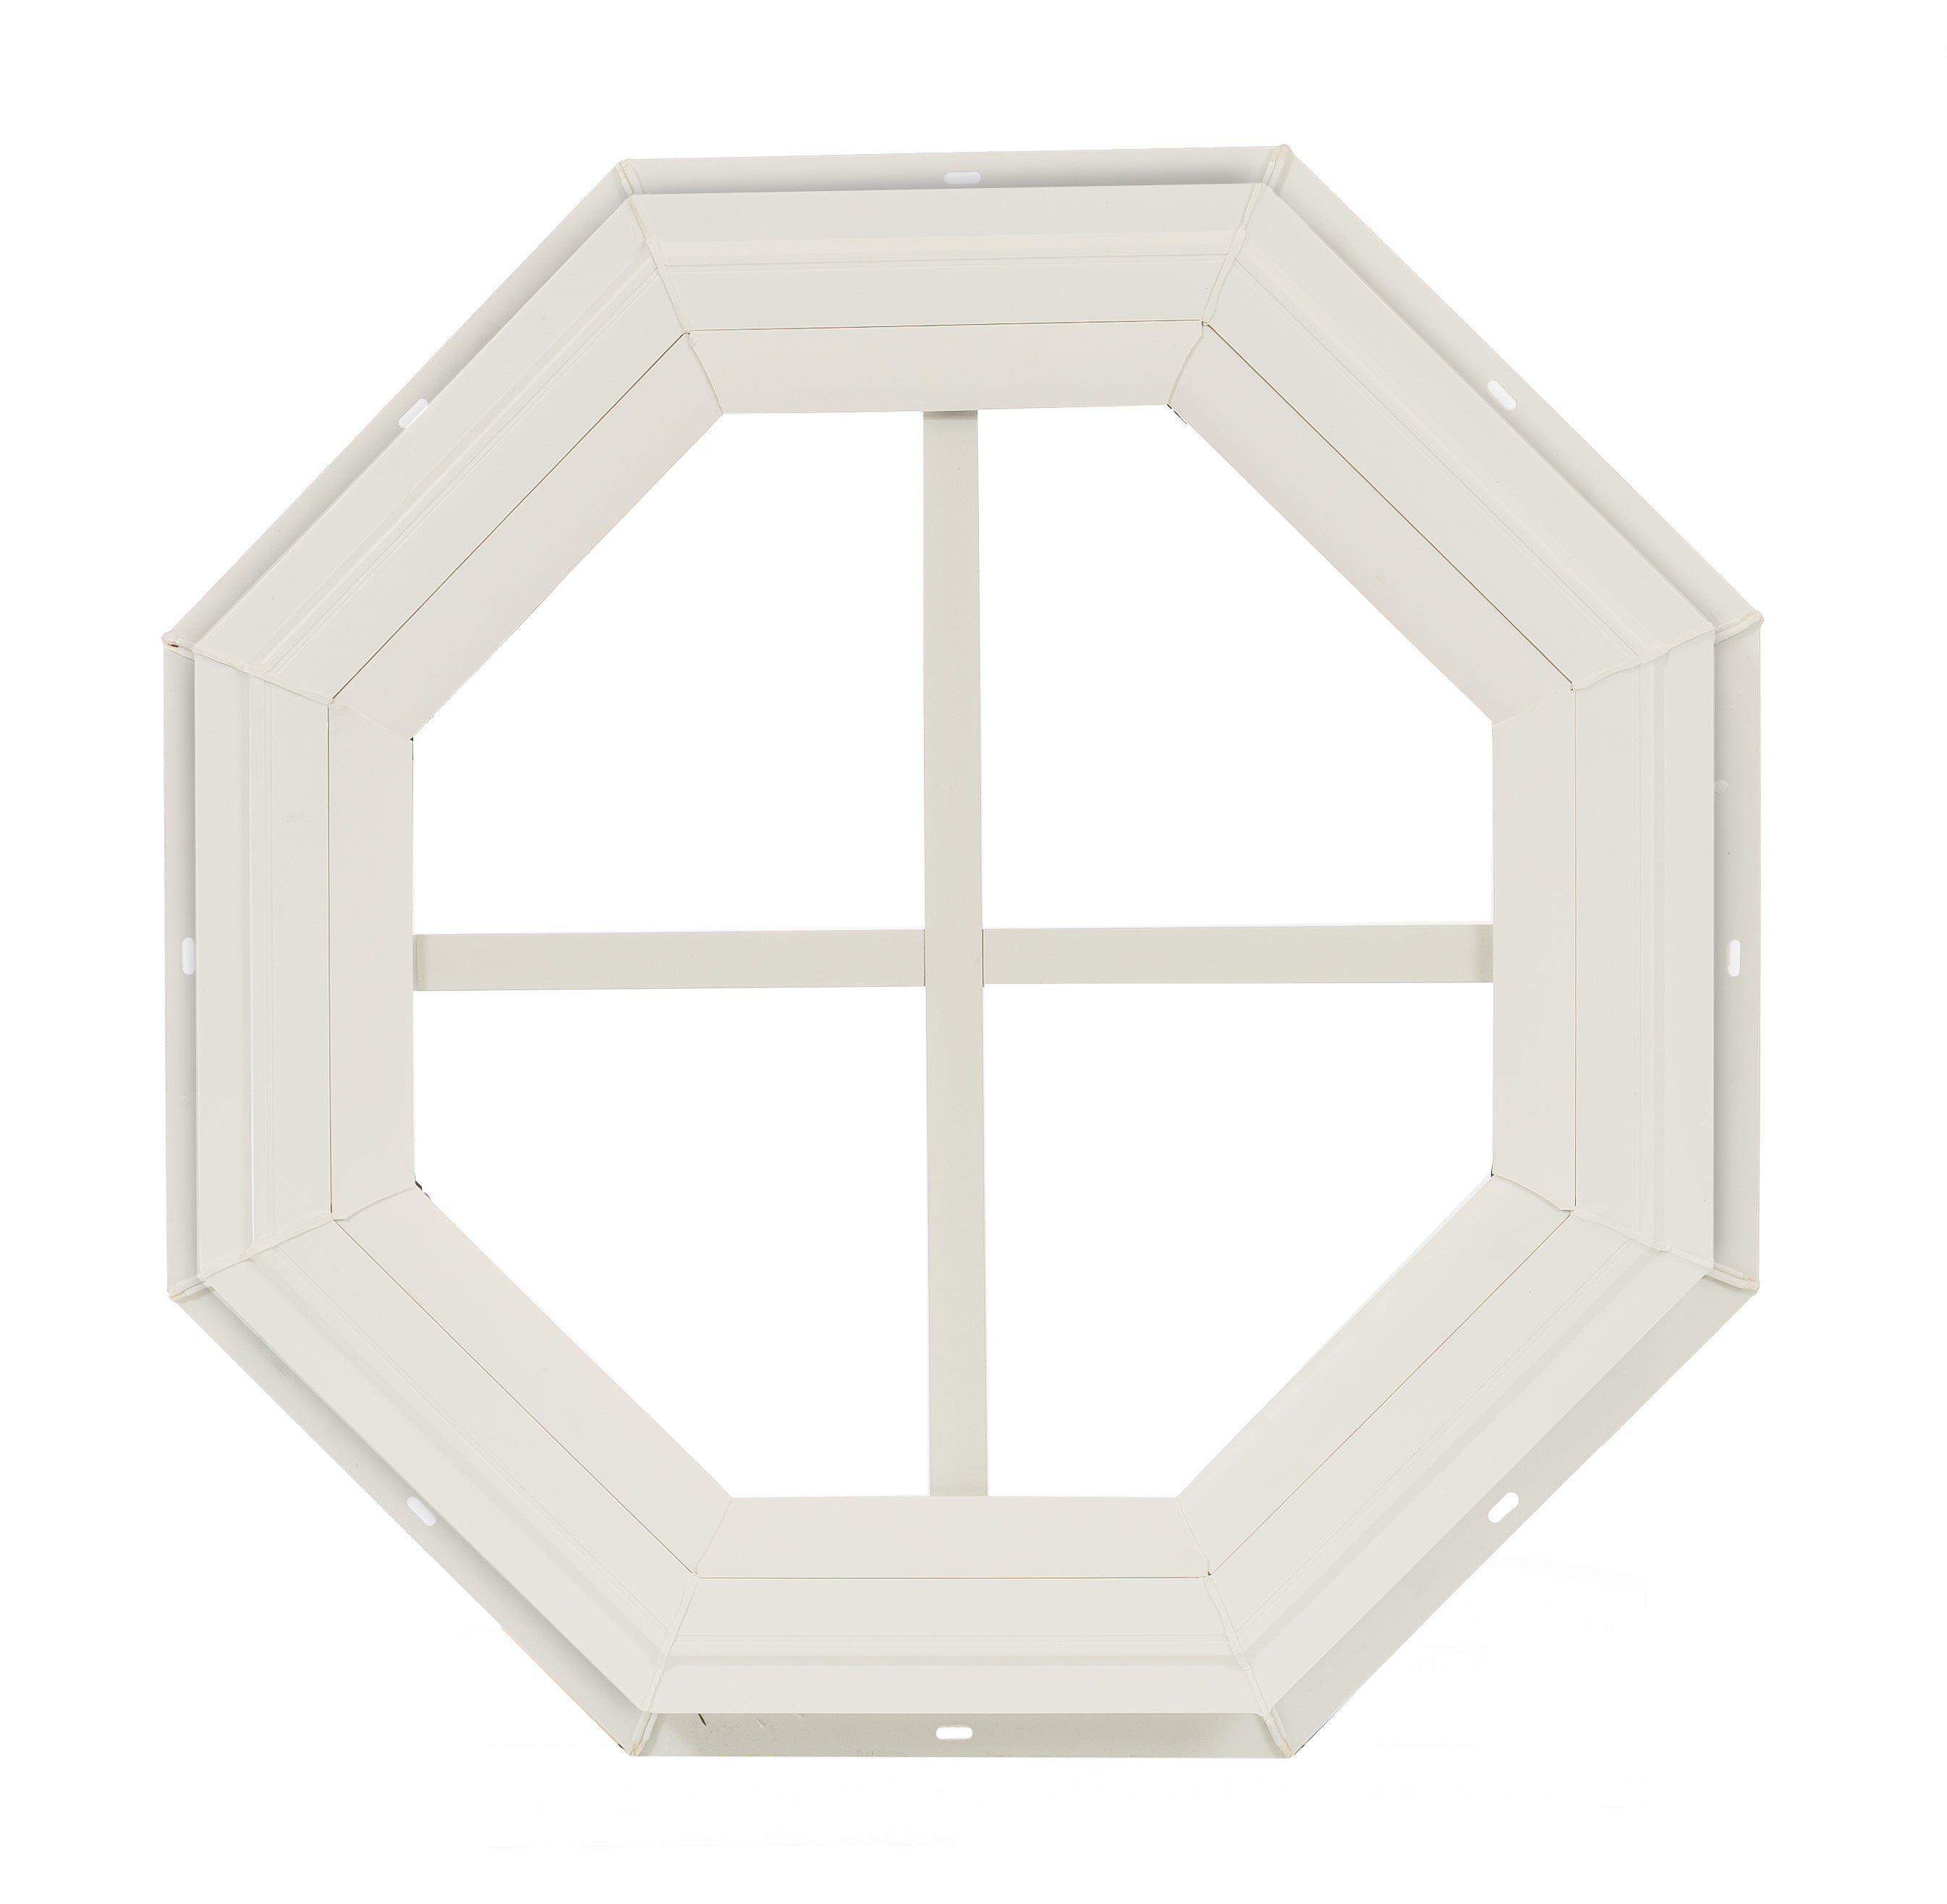 18" Octagon Gable J-Lap Mount PVC White Window with Grids for Sheds, Playhouses, and MORE